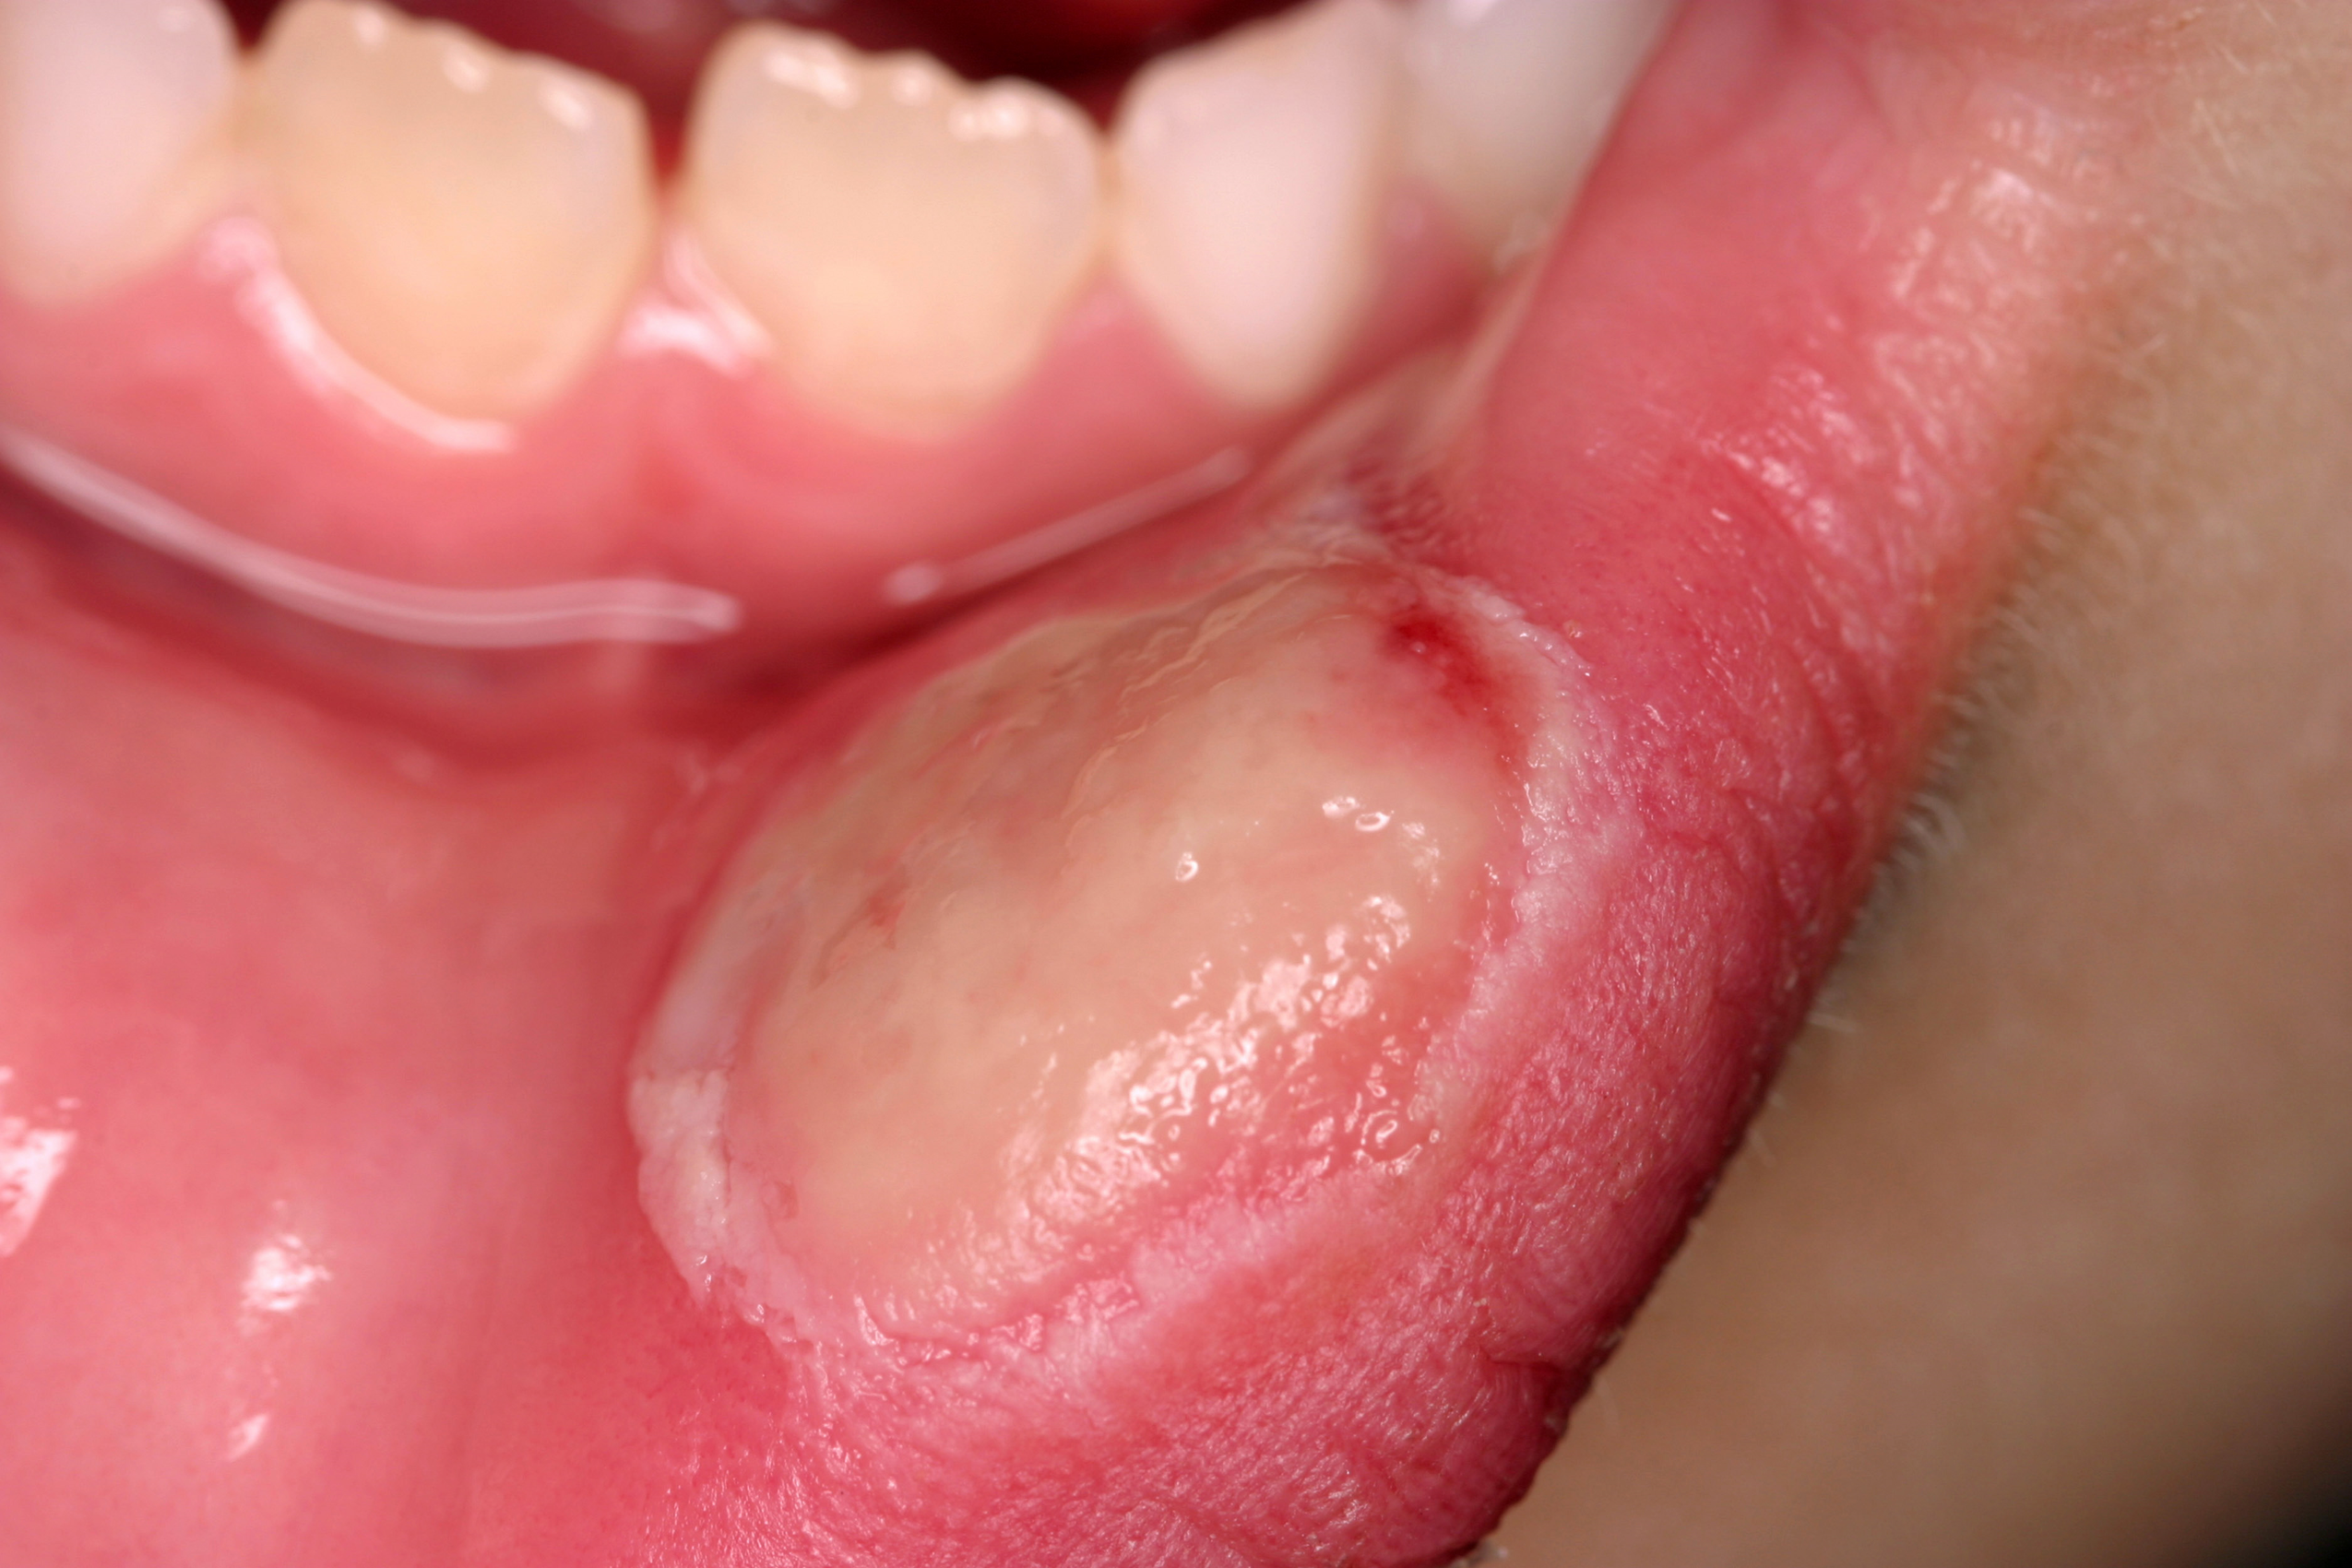 Hpv mouth cold sores